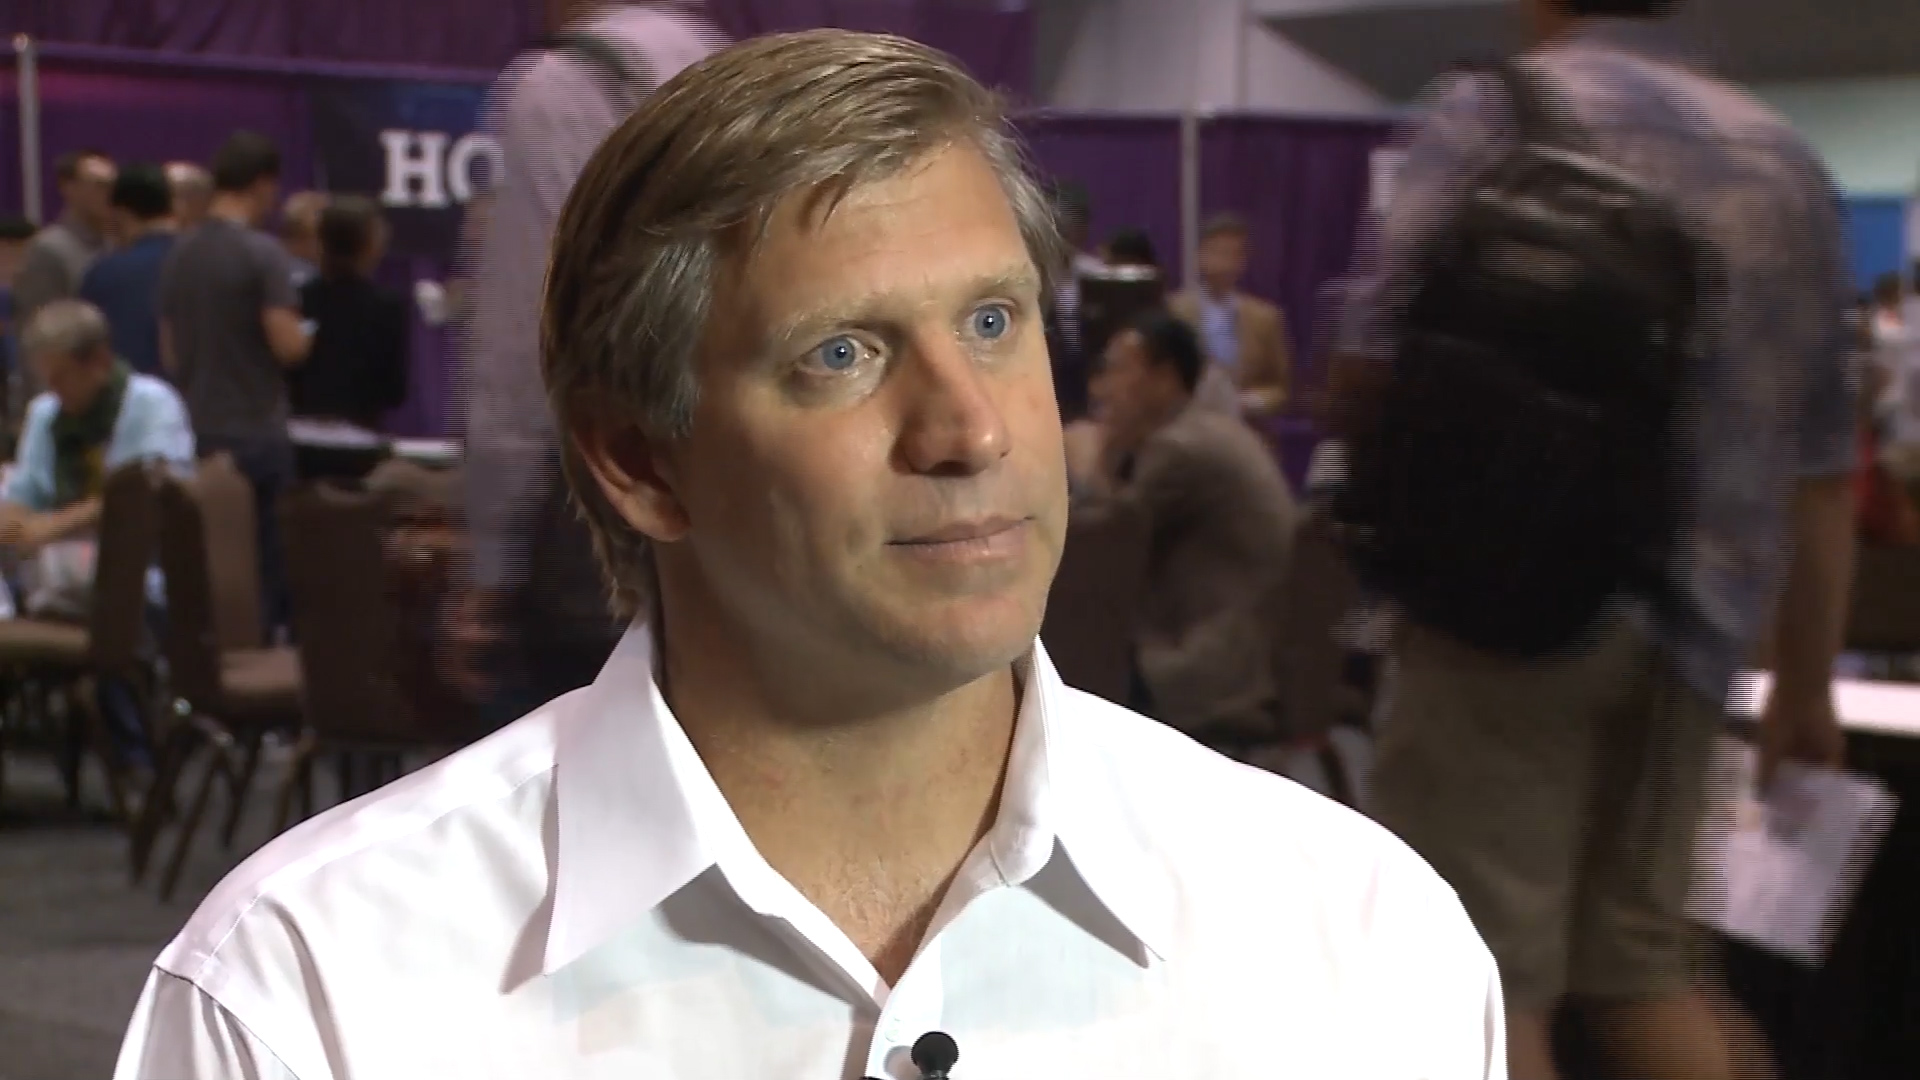 One more question for U.S. presidential candidate Zoltan Istvan on robots